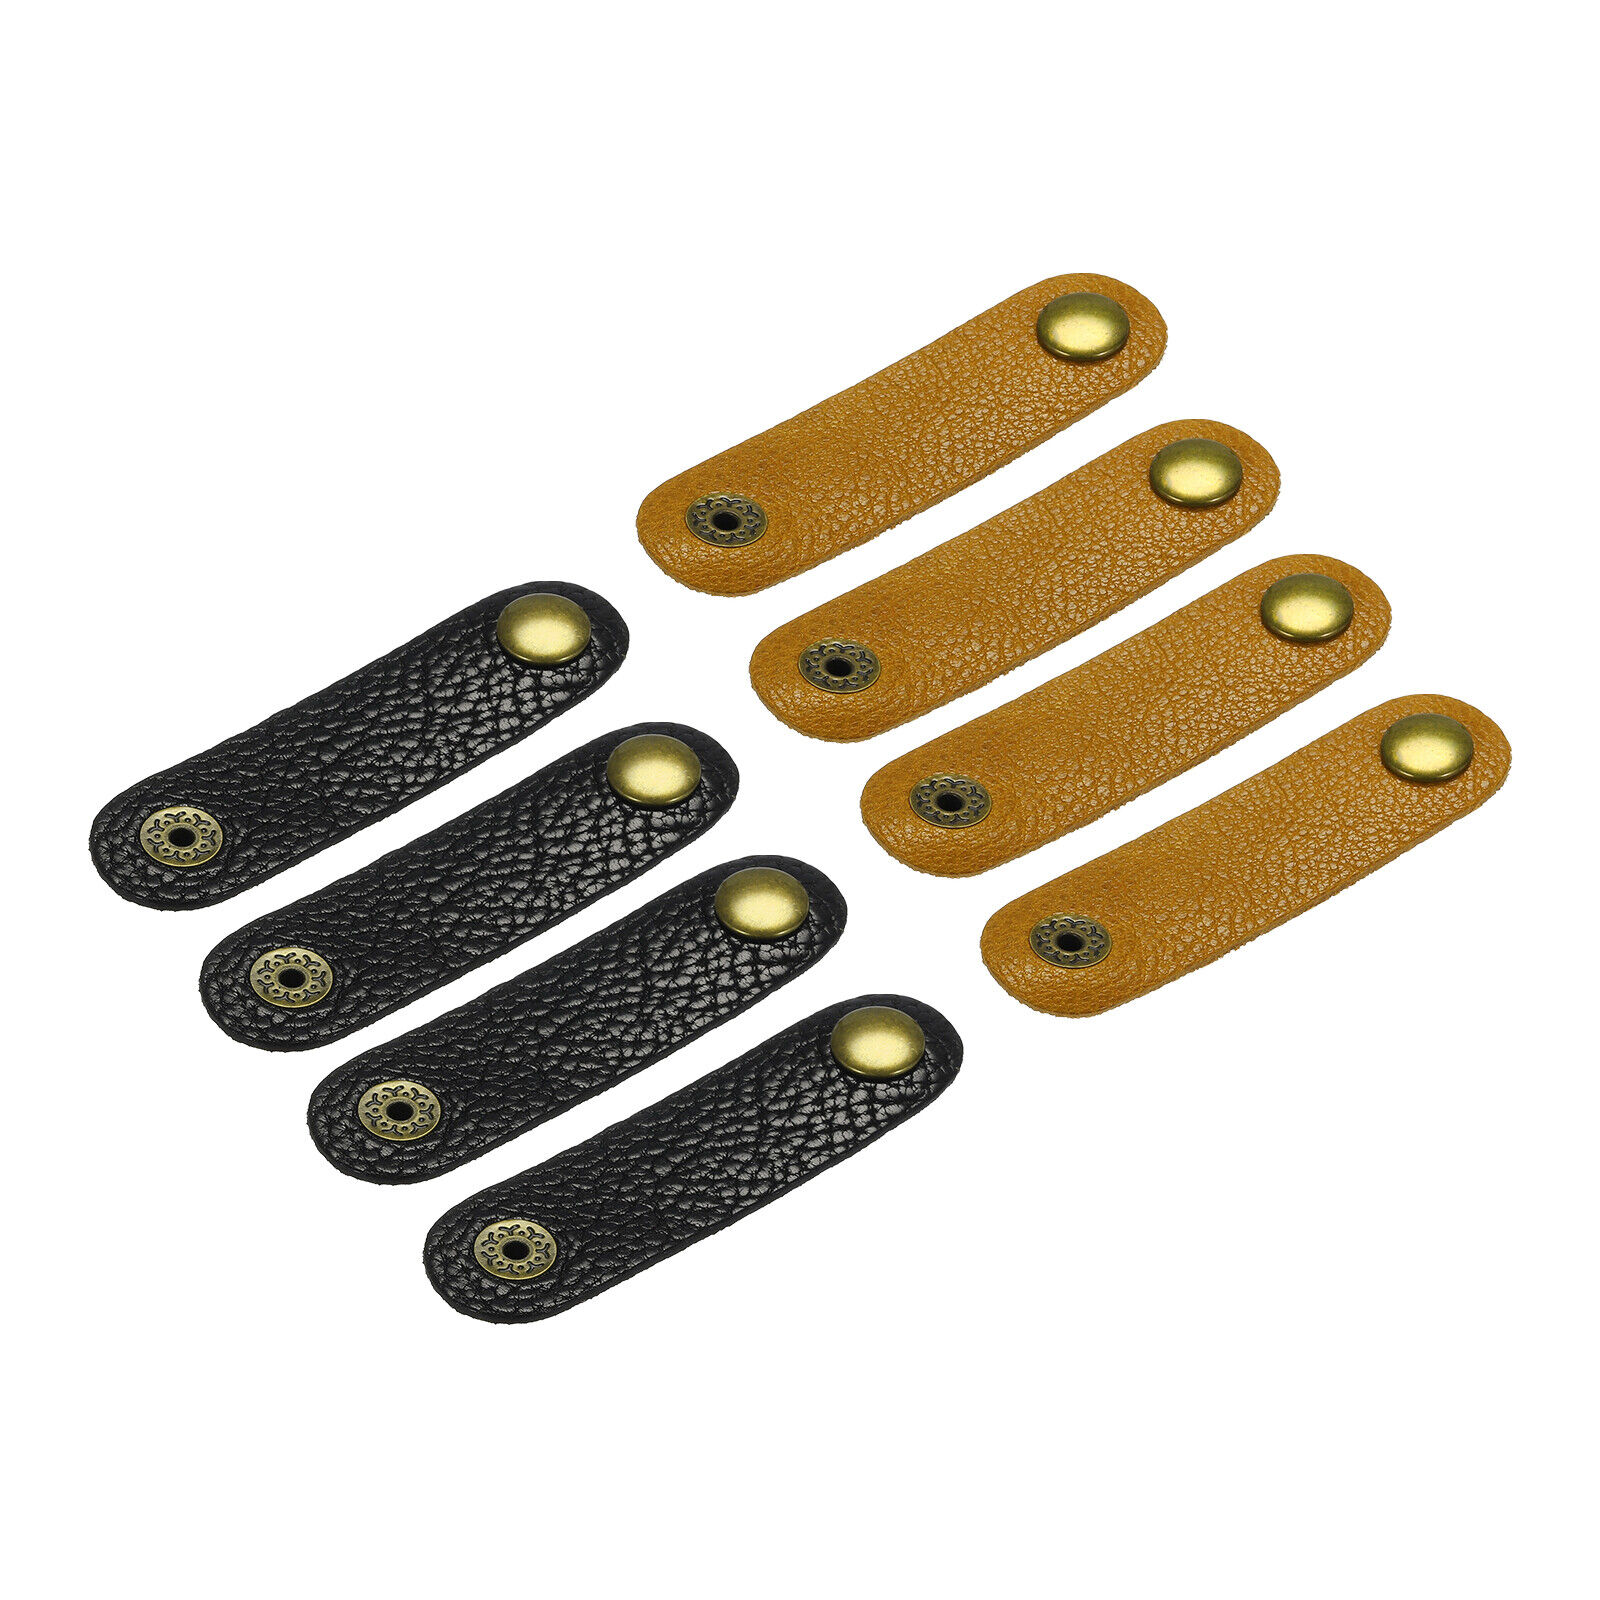 8Pcs Leather Cable Straps Cord Organizer Cable Ties Soft Black/Yellow Brown